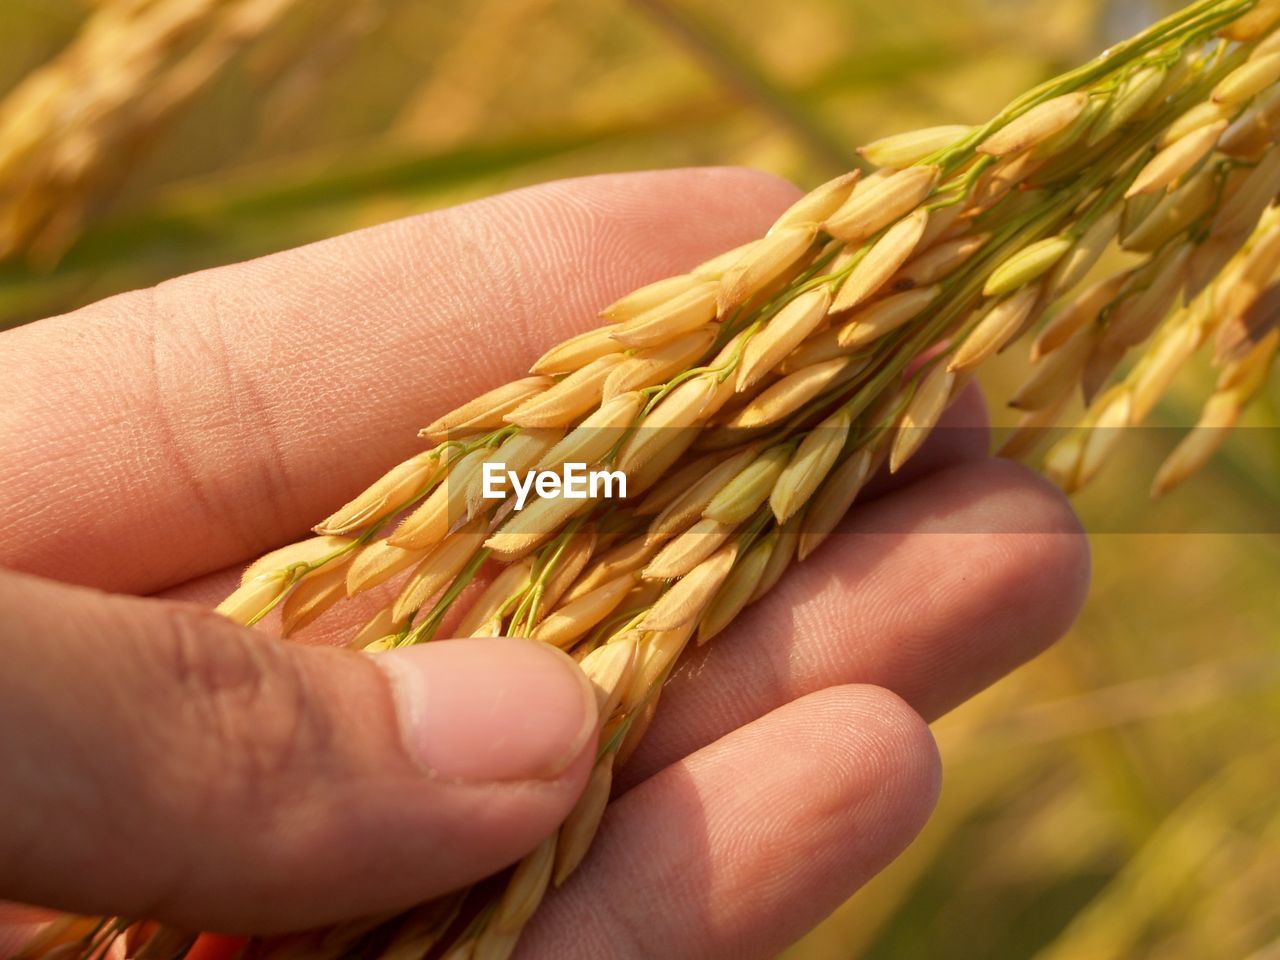 close-up of hand holding wheat